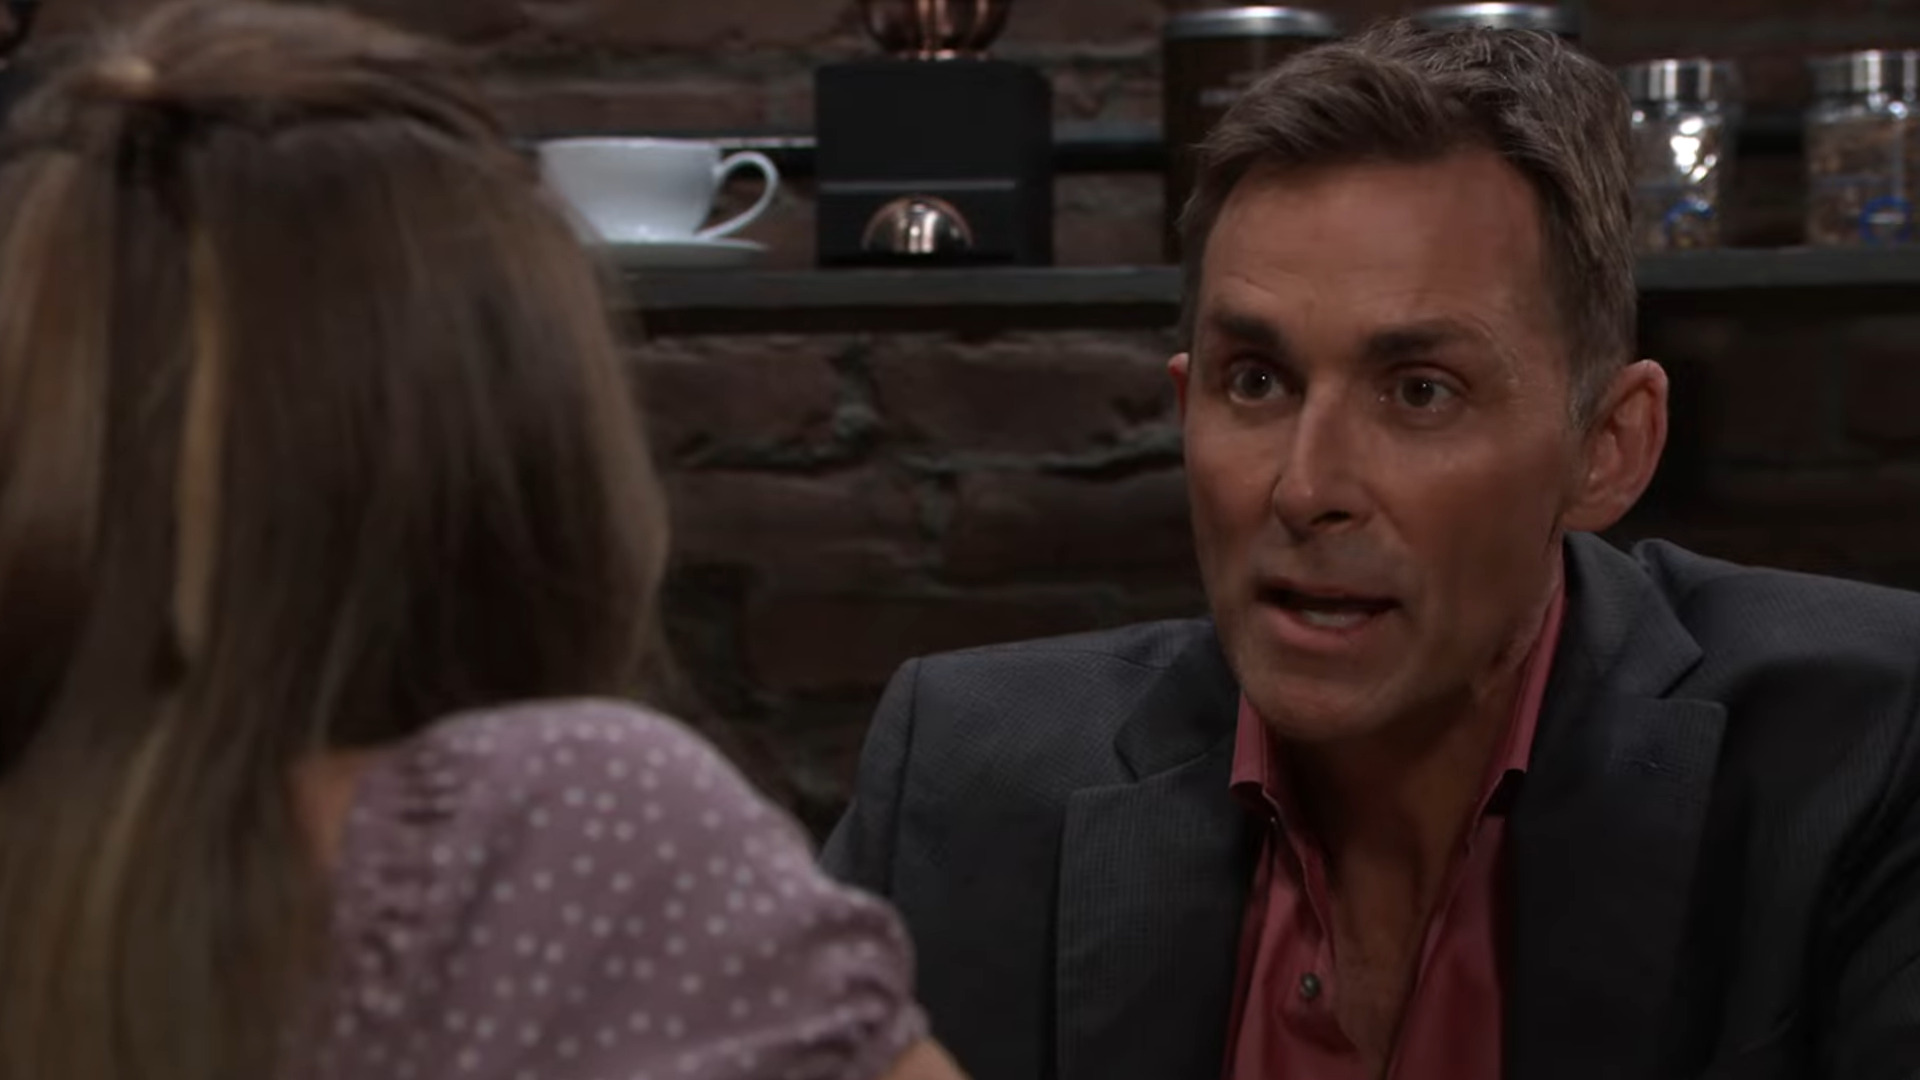 valentin tells charlotte that he's changing